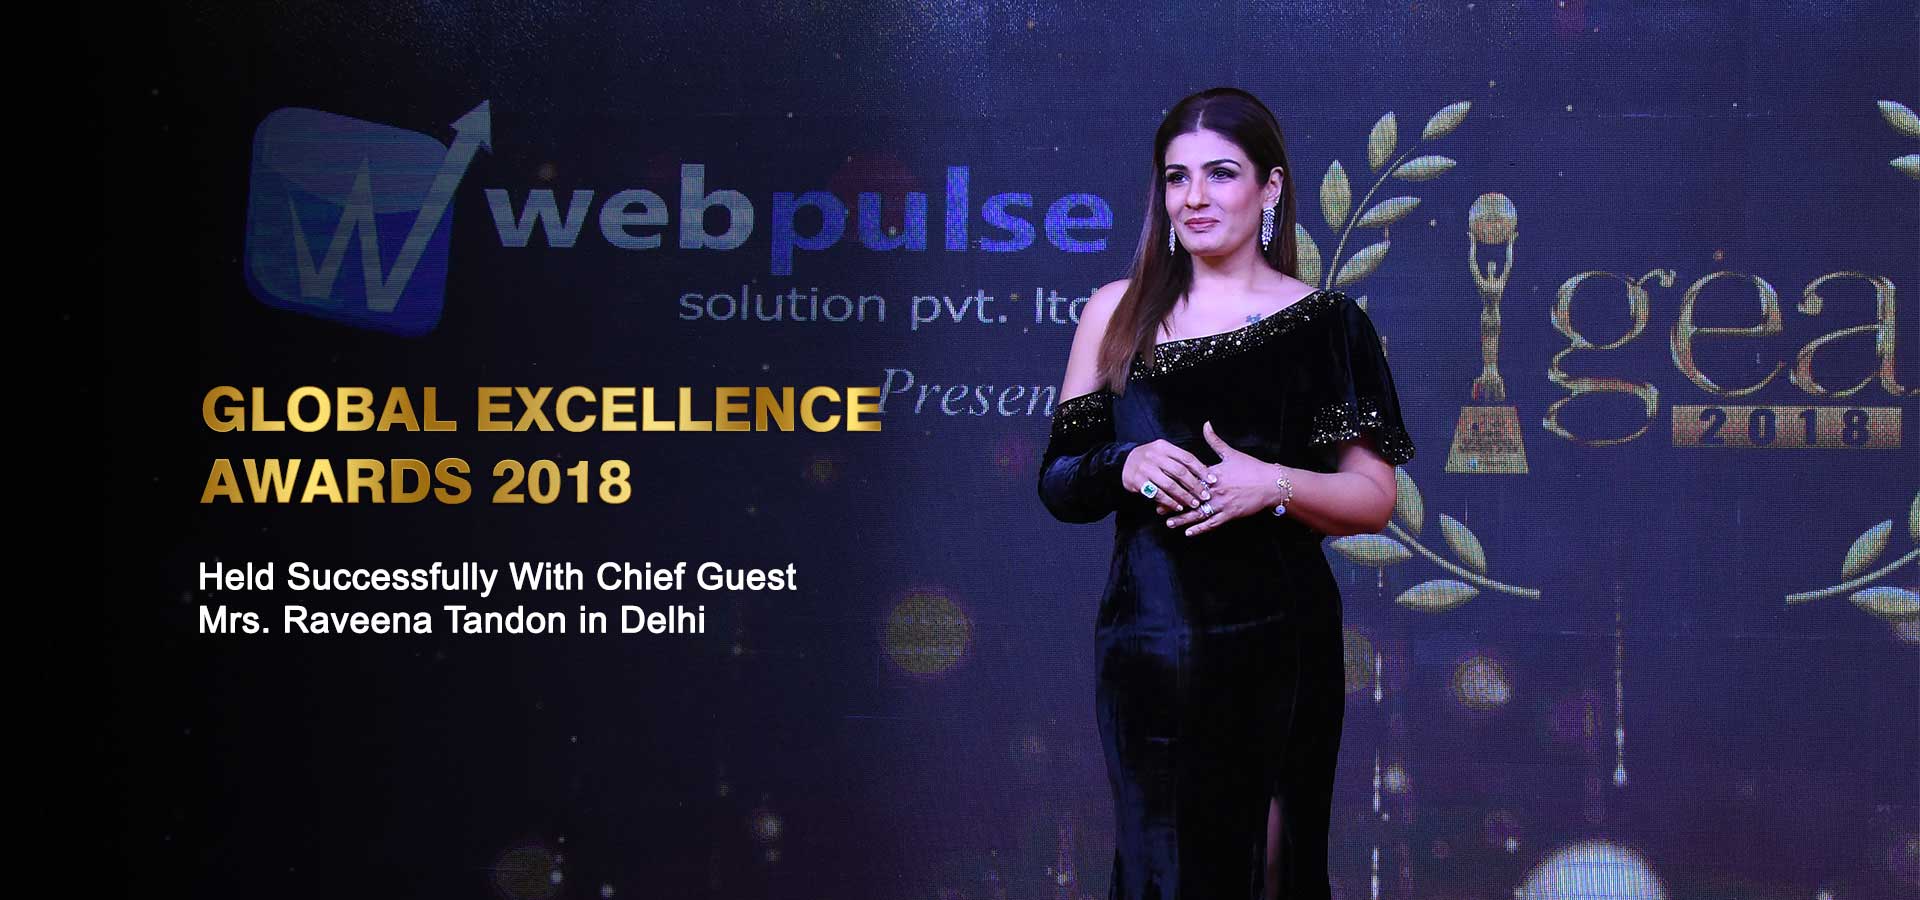 Global Excellence Awards 2018 Completed Successfully